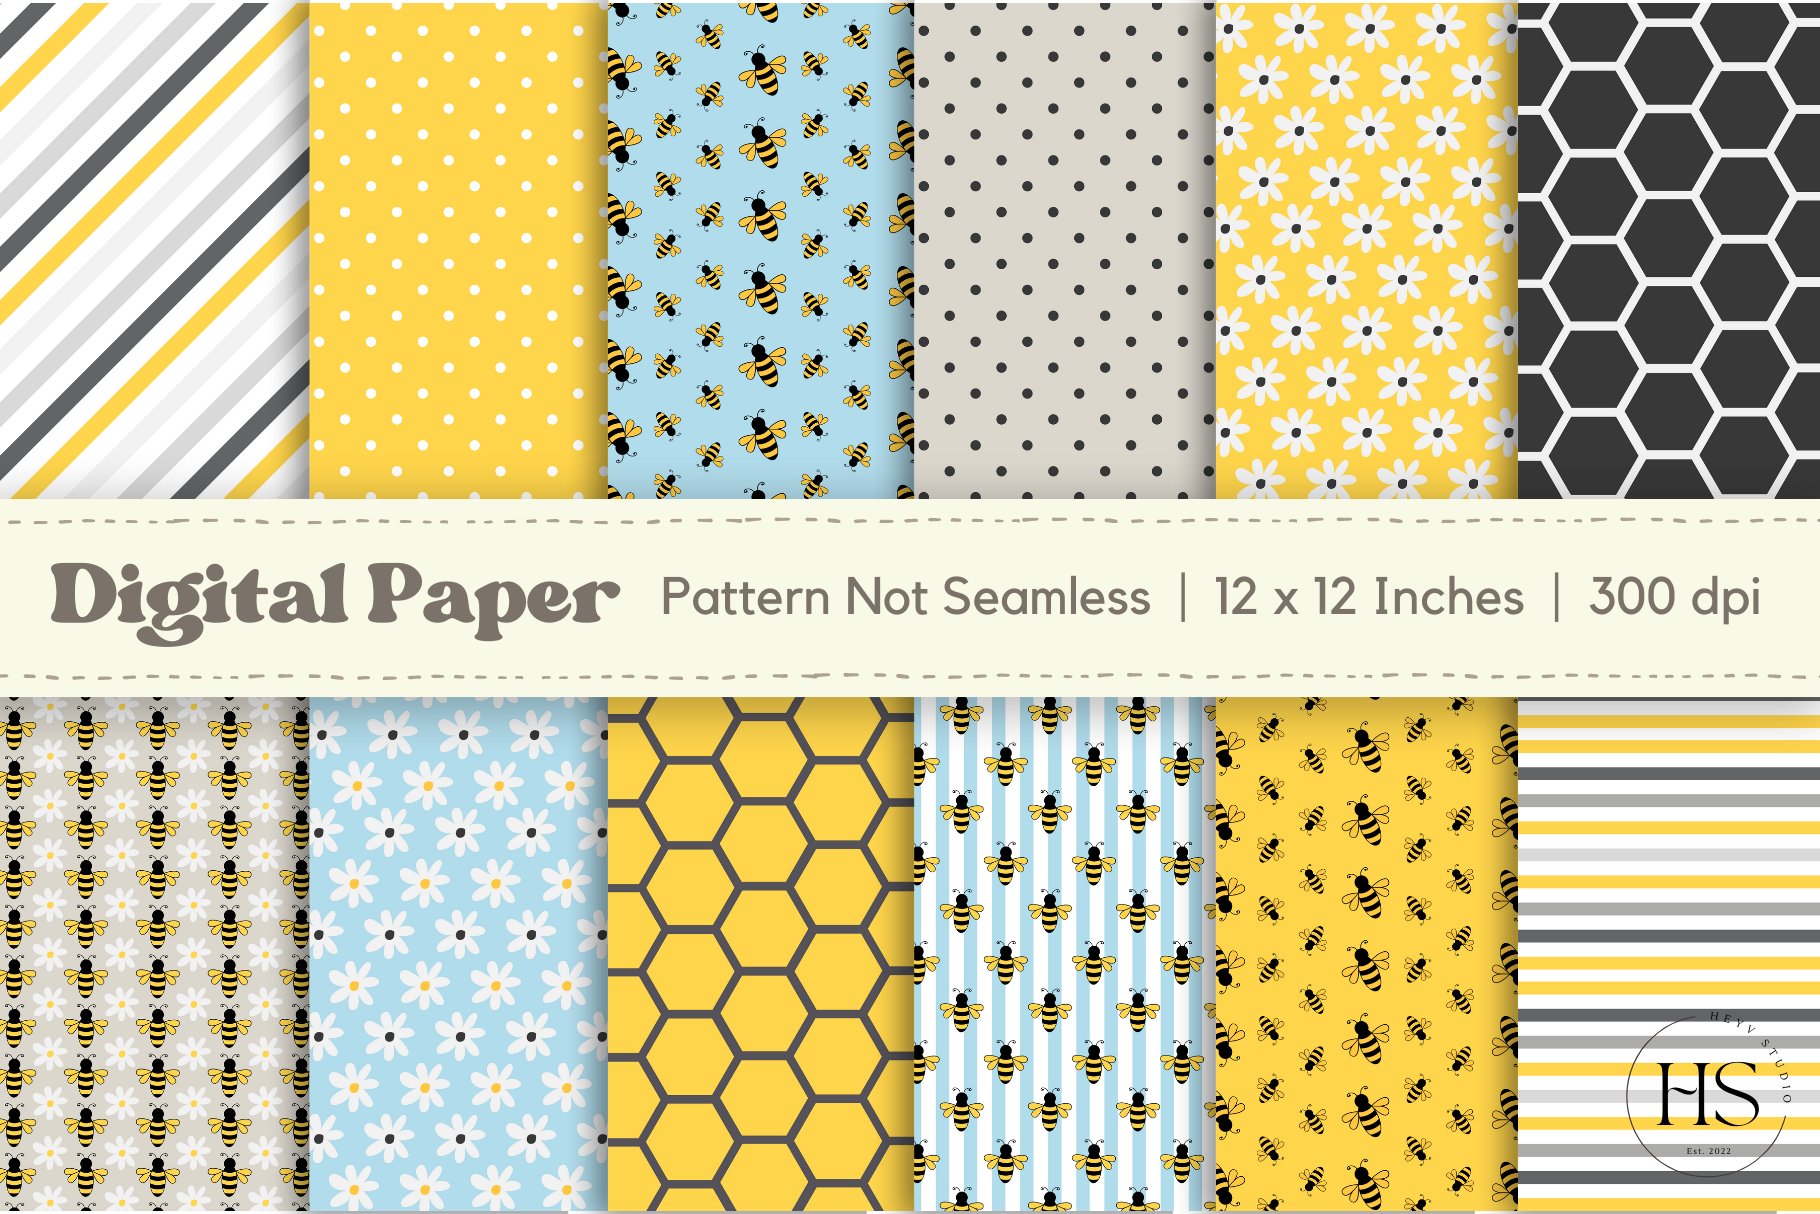 Honey & Bees Digital Paper Patterns cover image.